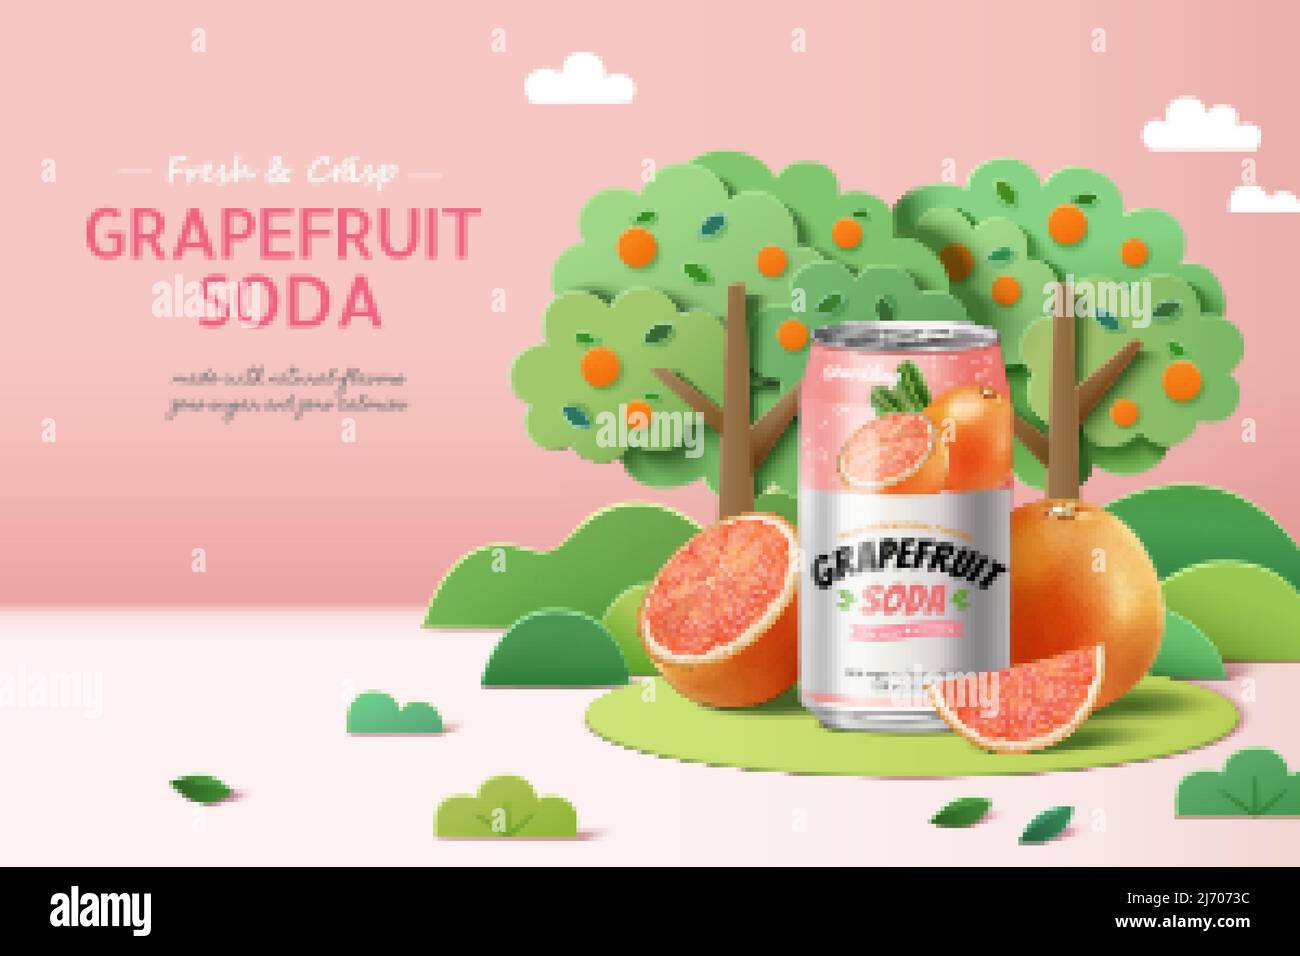 Grapefruit soda banner ad. 3D Illustration of a can of grapefruit soda in papercraft garden with realistic sliced and wedged fruit displayed on the gr Stock Vector